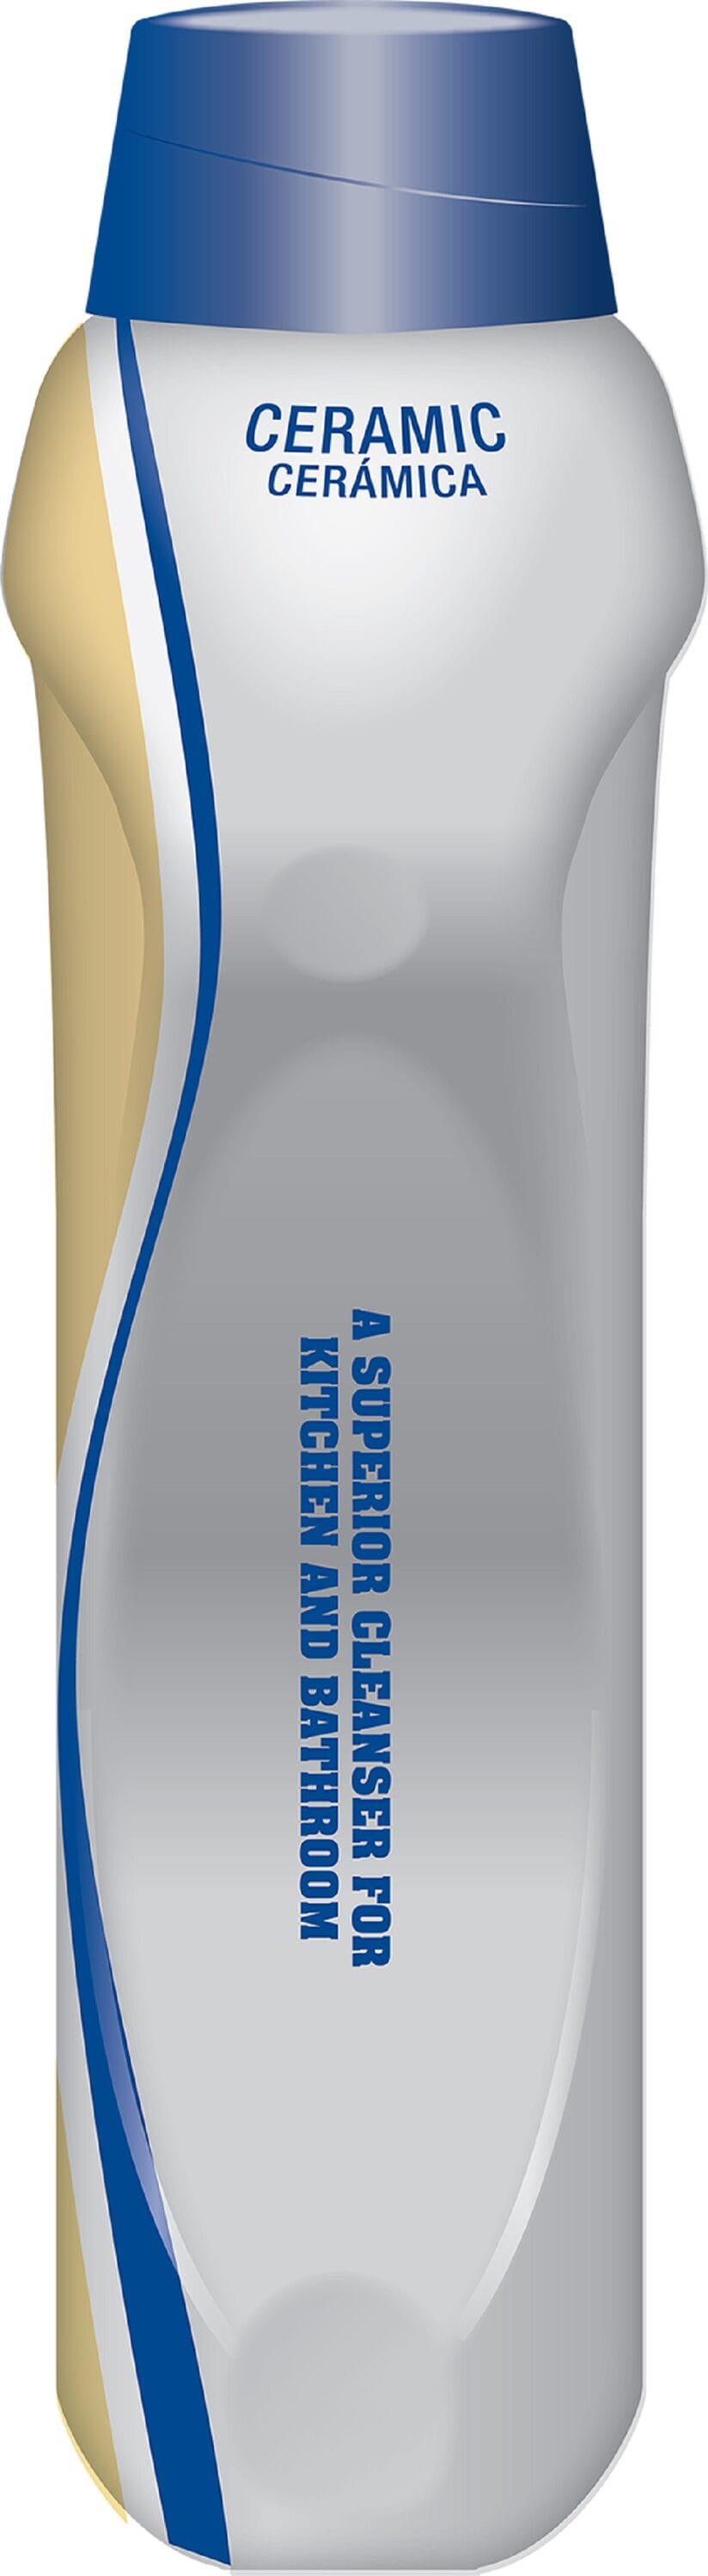 Bar Keepers Friend® Citrus Scented Soft Cleanser, 26 oz - Harris Teeter